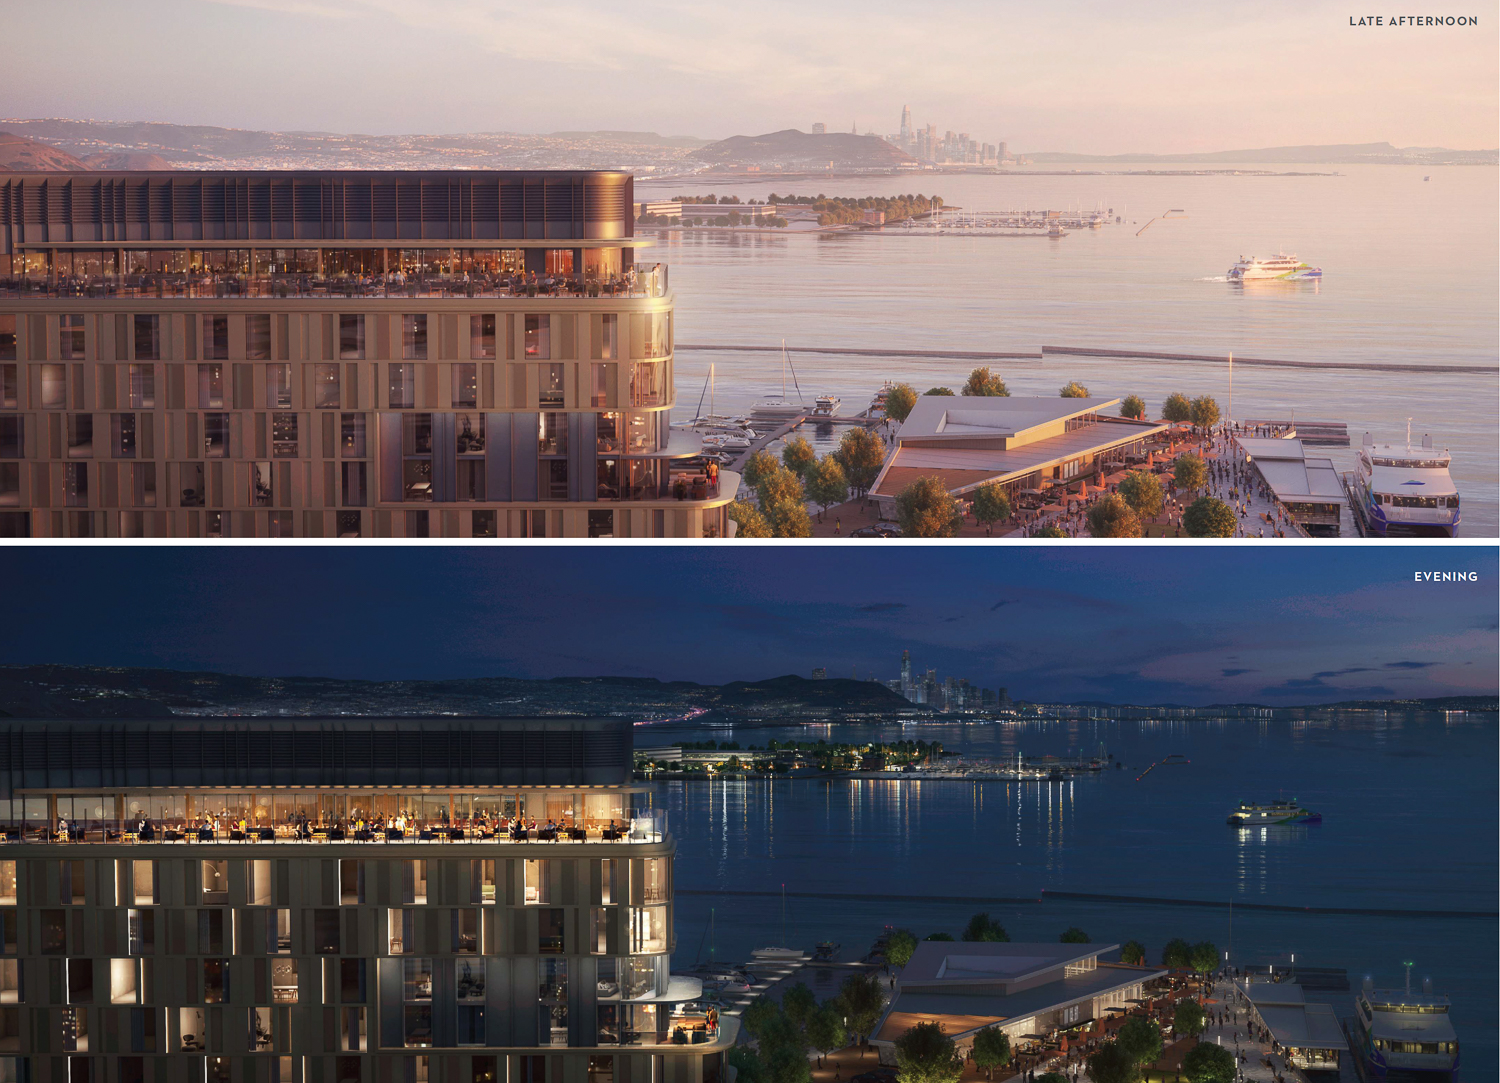 367 Marina Boulevard rooftop deck view in the afternoon (top) and evening (bottom), rendering by SB Architects